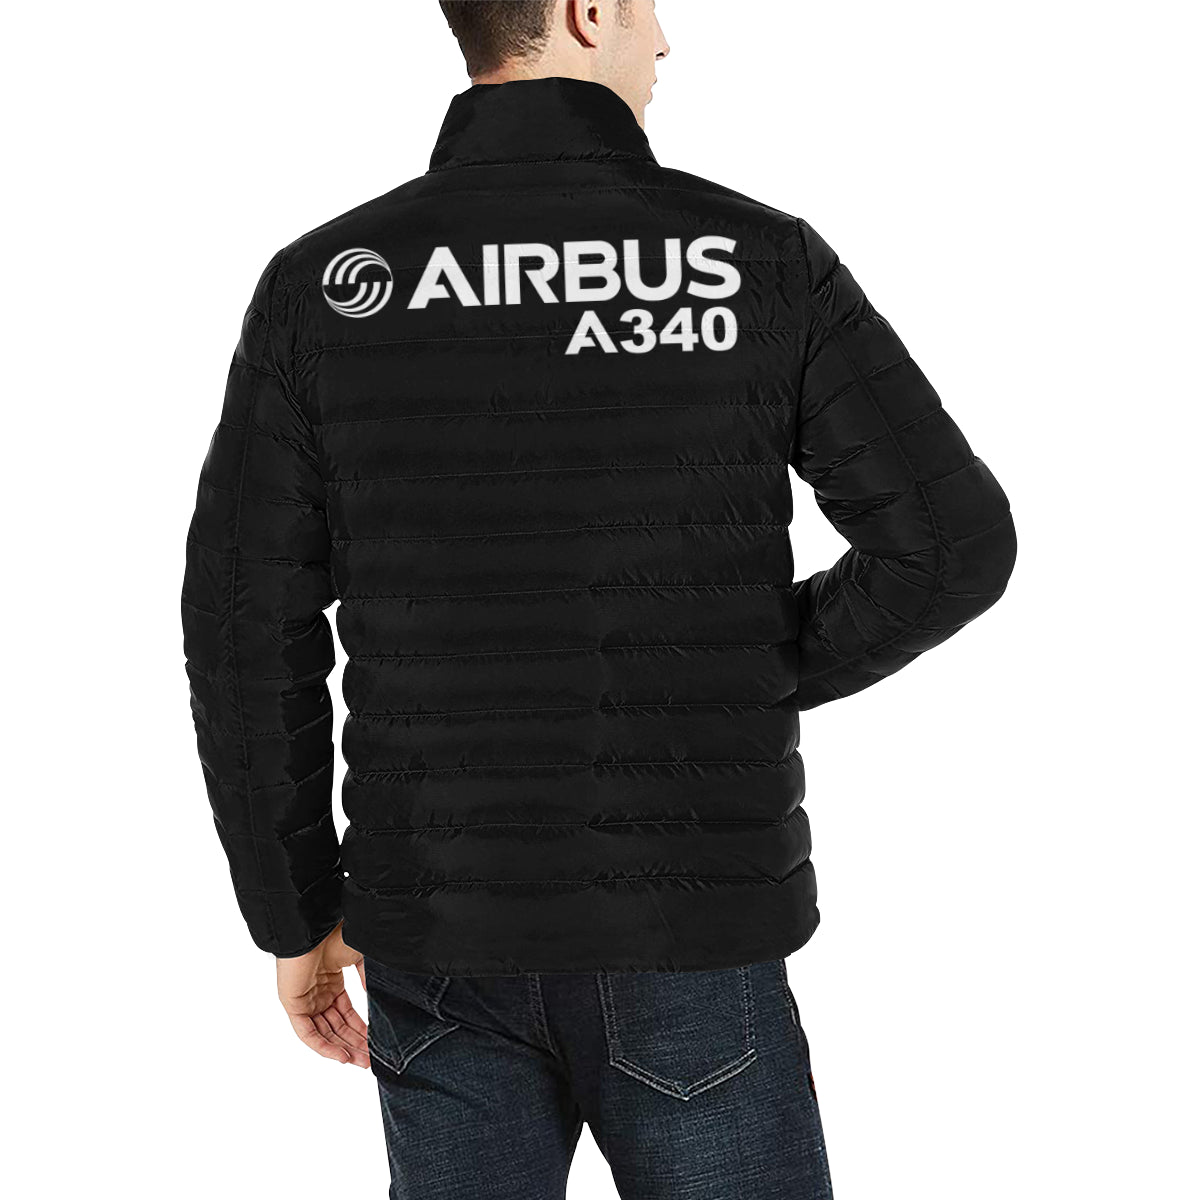 Airbus A340 Men's Stand Collar Padded Jacket e-joyer